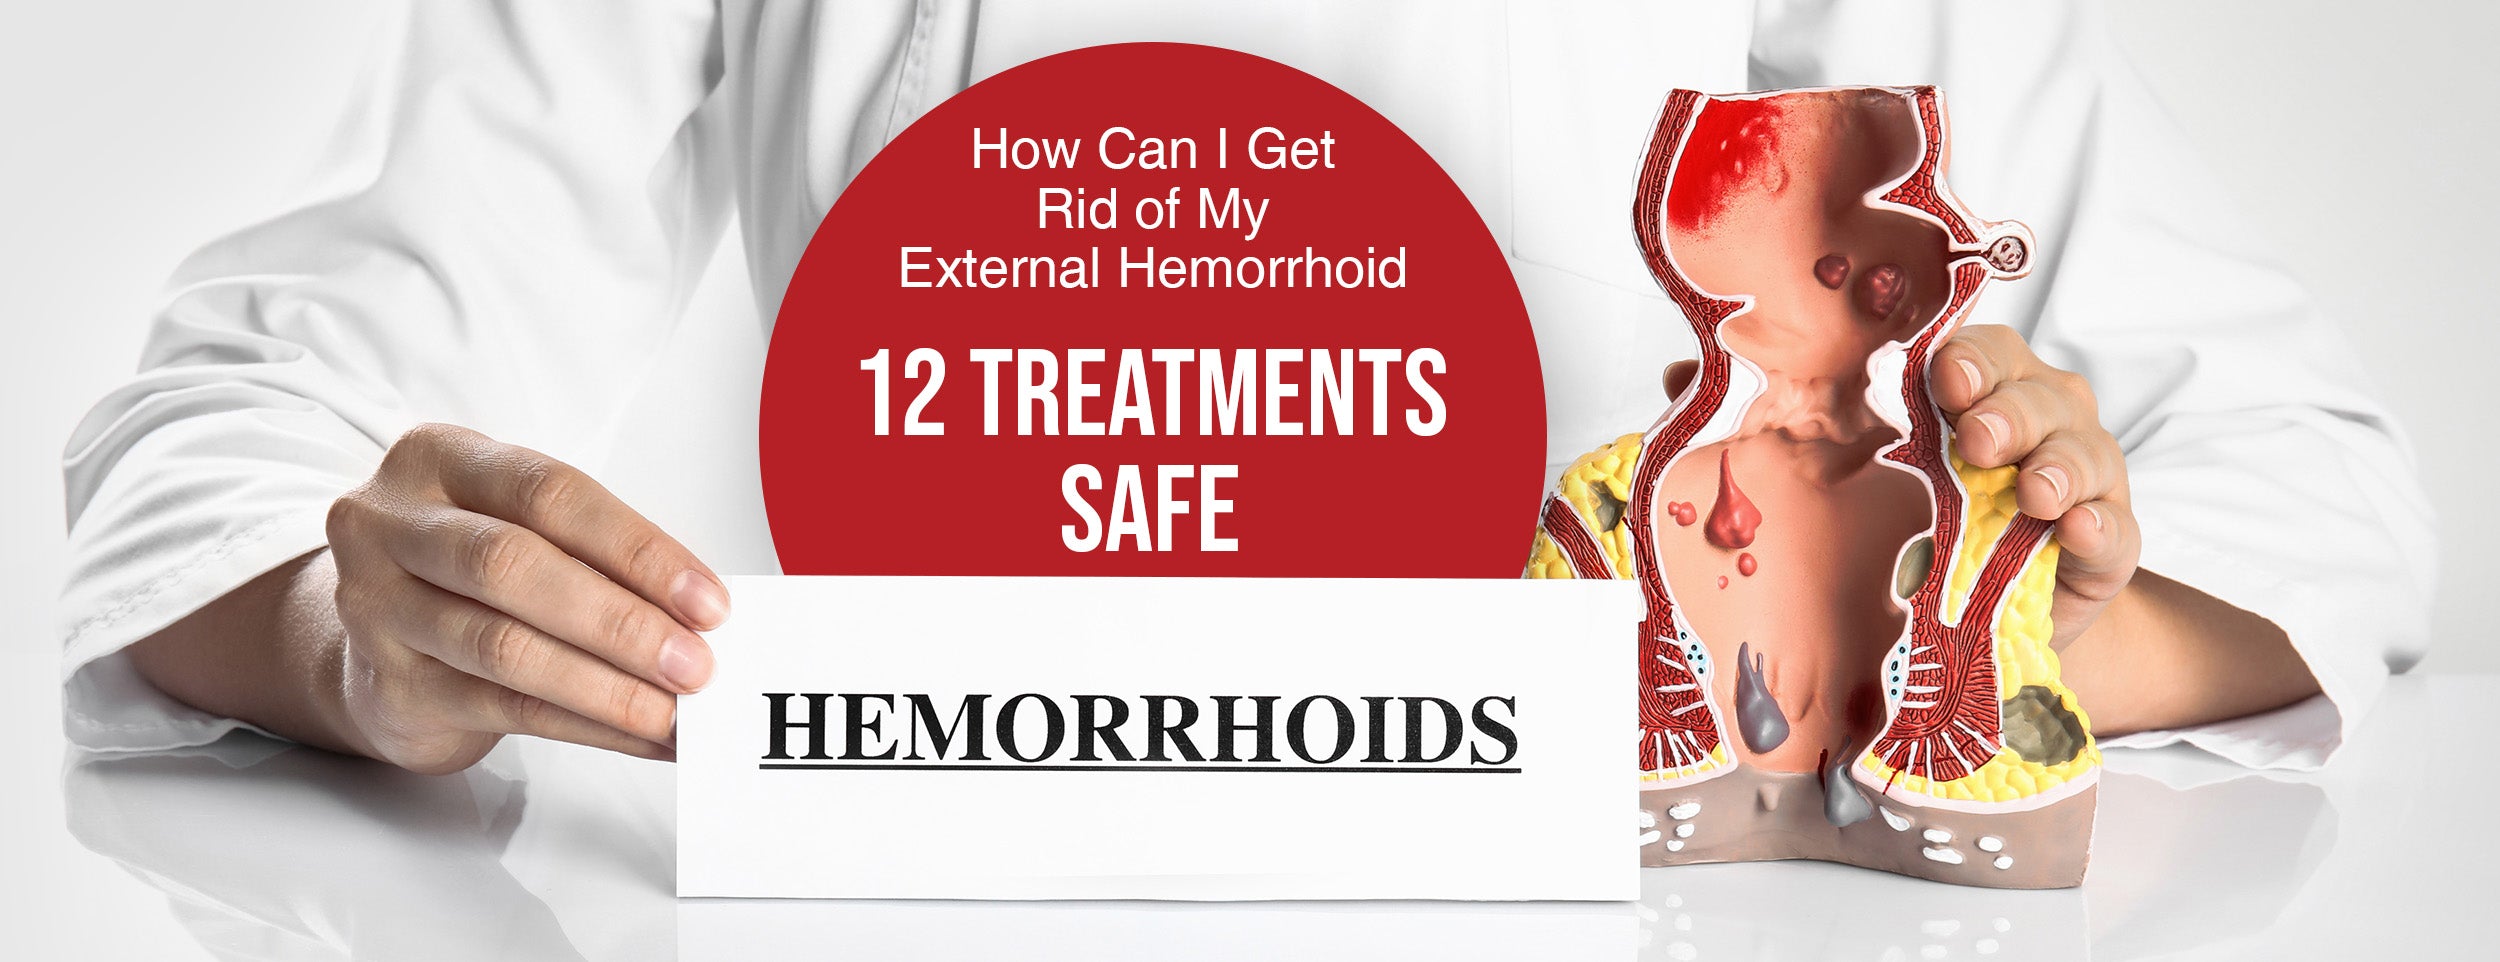 Hemorrhoids early pregnancy sign: 7 Symptoms & 7 Causes – Dr. Numb®